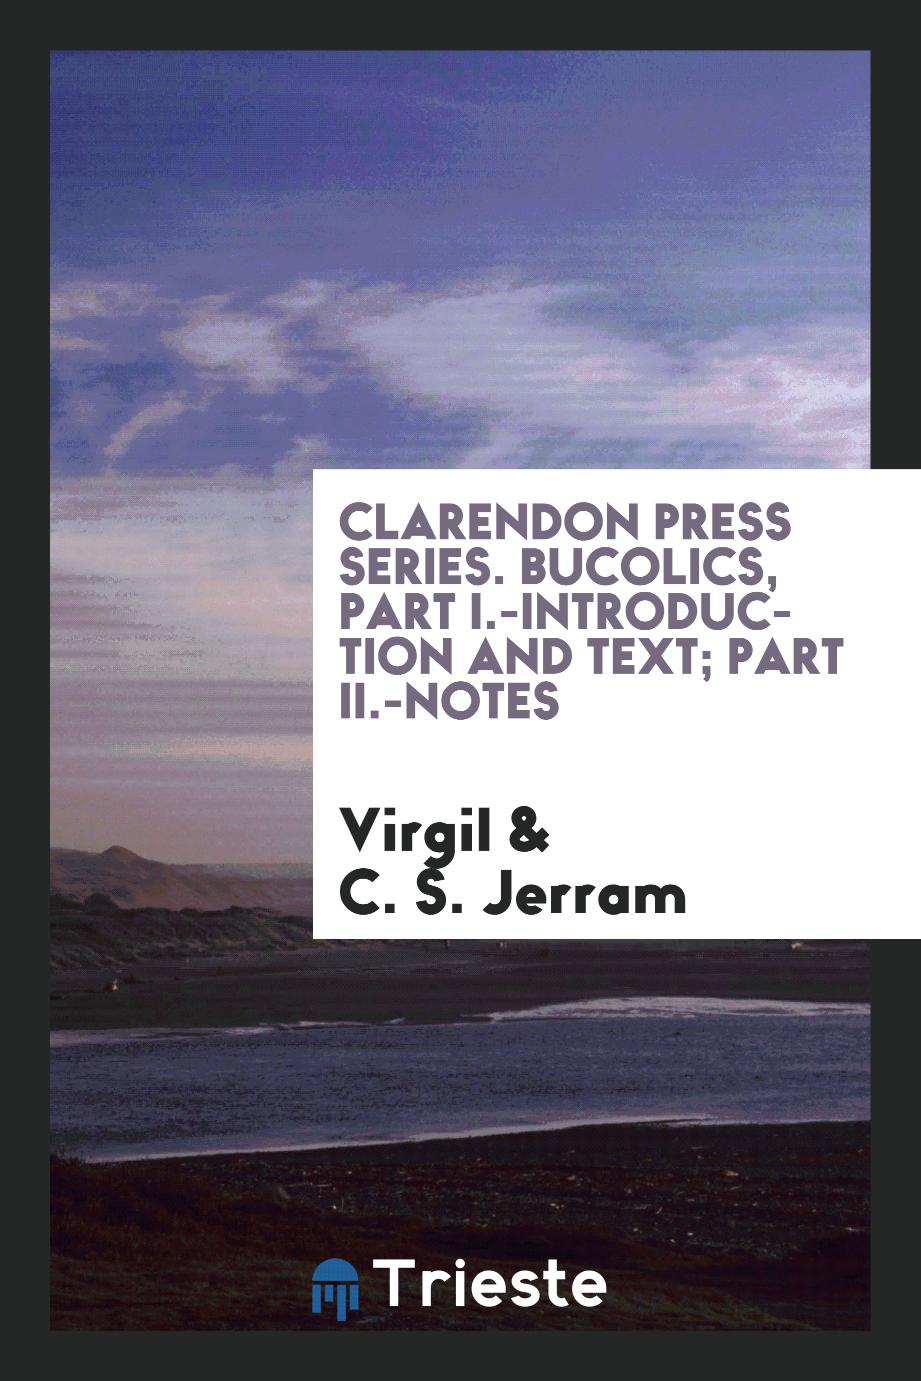 Clarendon Press Series. Bucolics, Part I.-Introduction and Text; Part II.-Notes